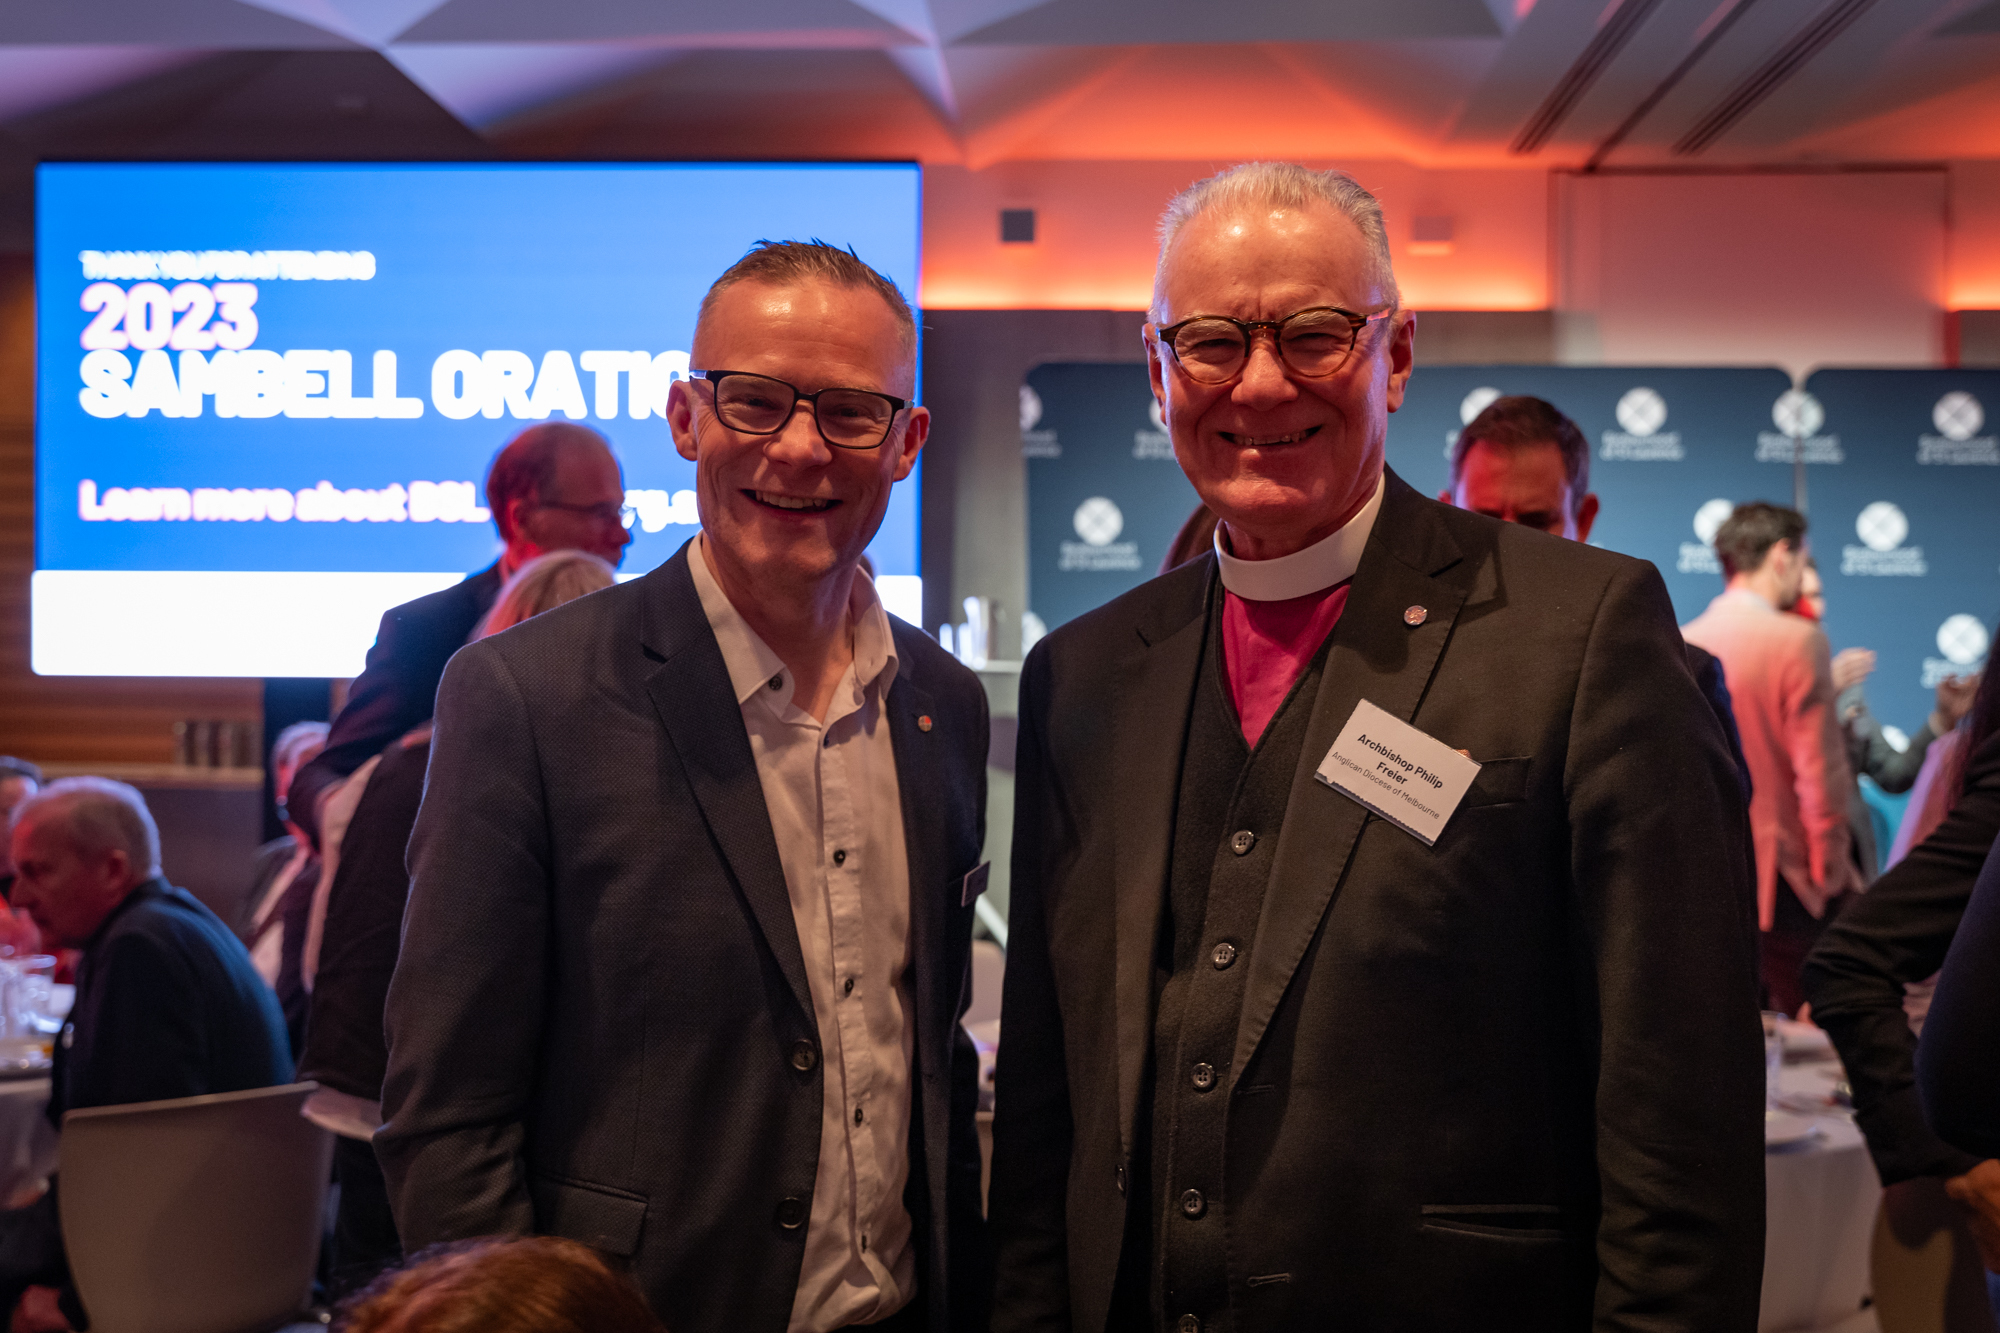 BSL’s Internal Communications Lead David Bain, and The Most Reverend Dr Philip L. Freier. They are smiling at the camera and behind them is a digital screen with the words 2023 Sambell Oration on it